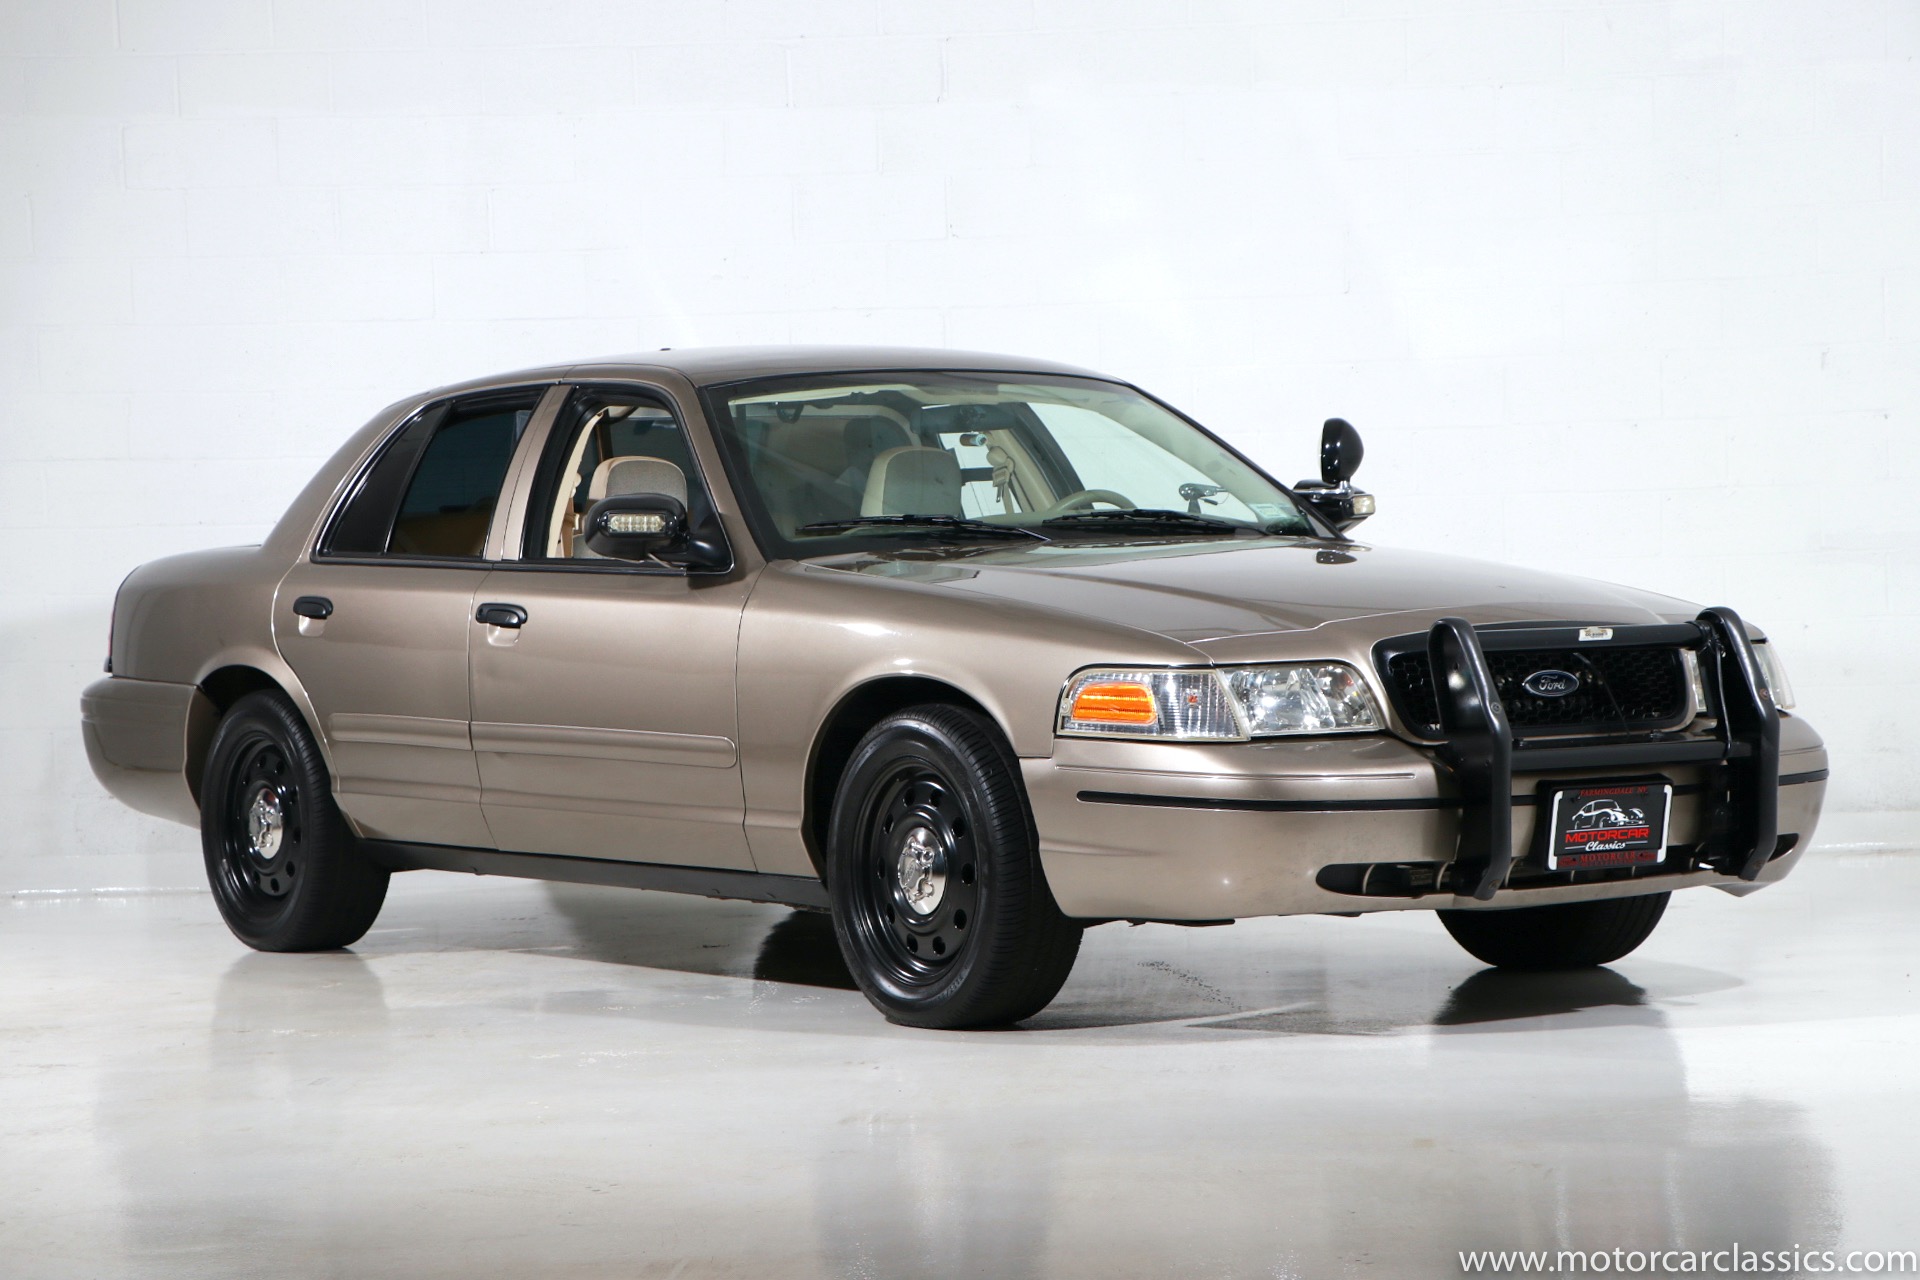 Used 2007 Ford Crown Victoria Police Interceptor For Sale ($22,900) |  Motorcar Classics Stock #1880